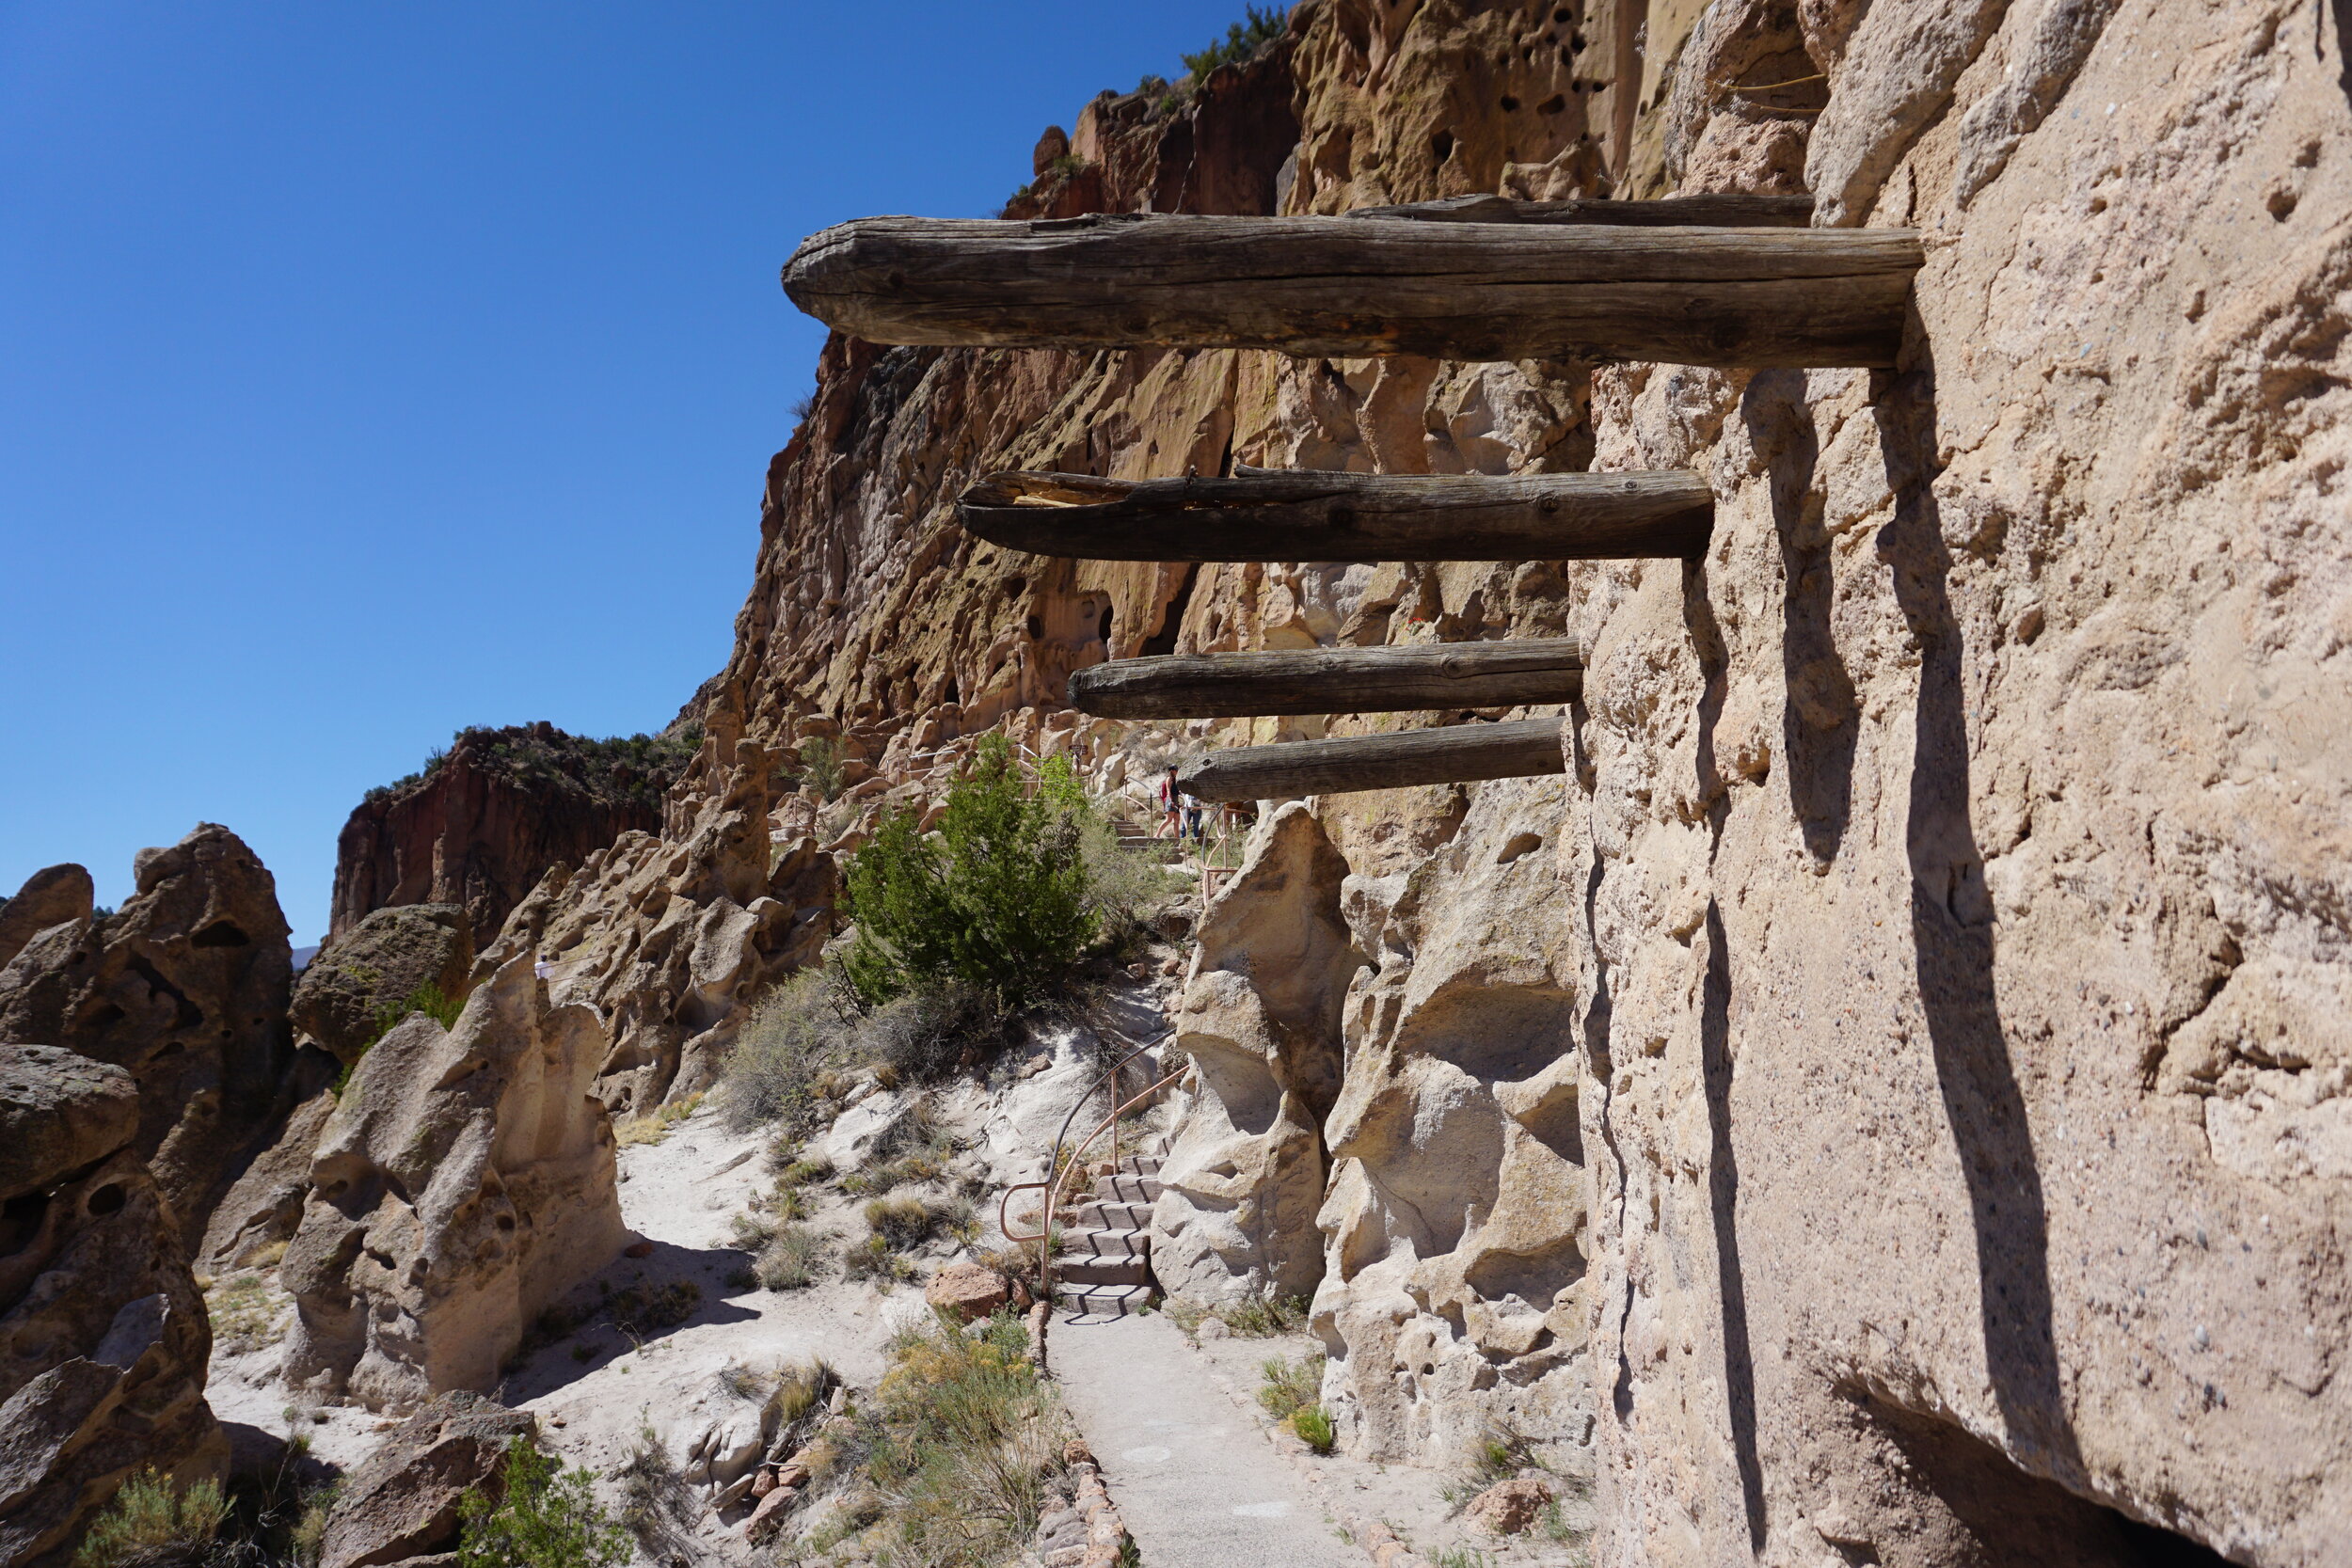 Stone ruins and cliff dwellings at Bandelier National Monument